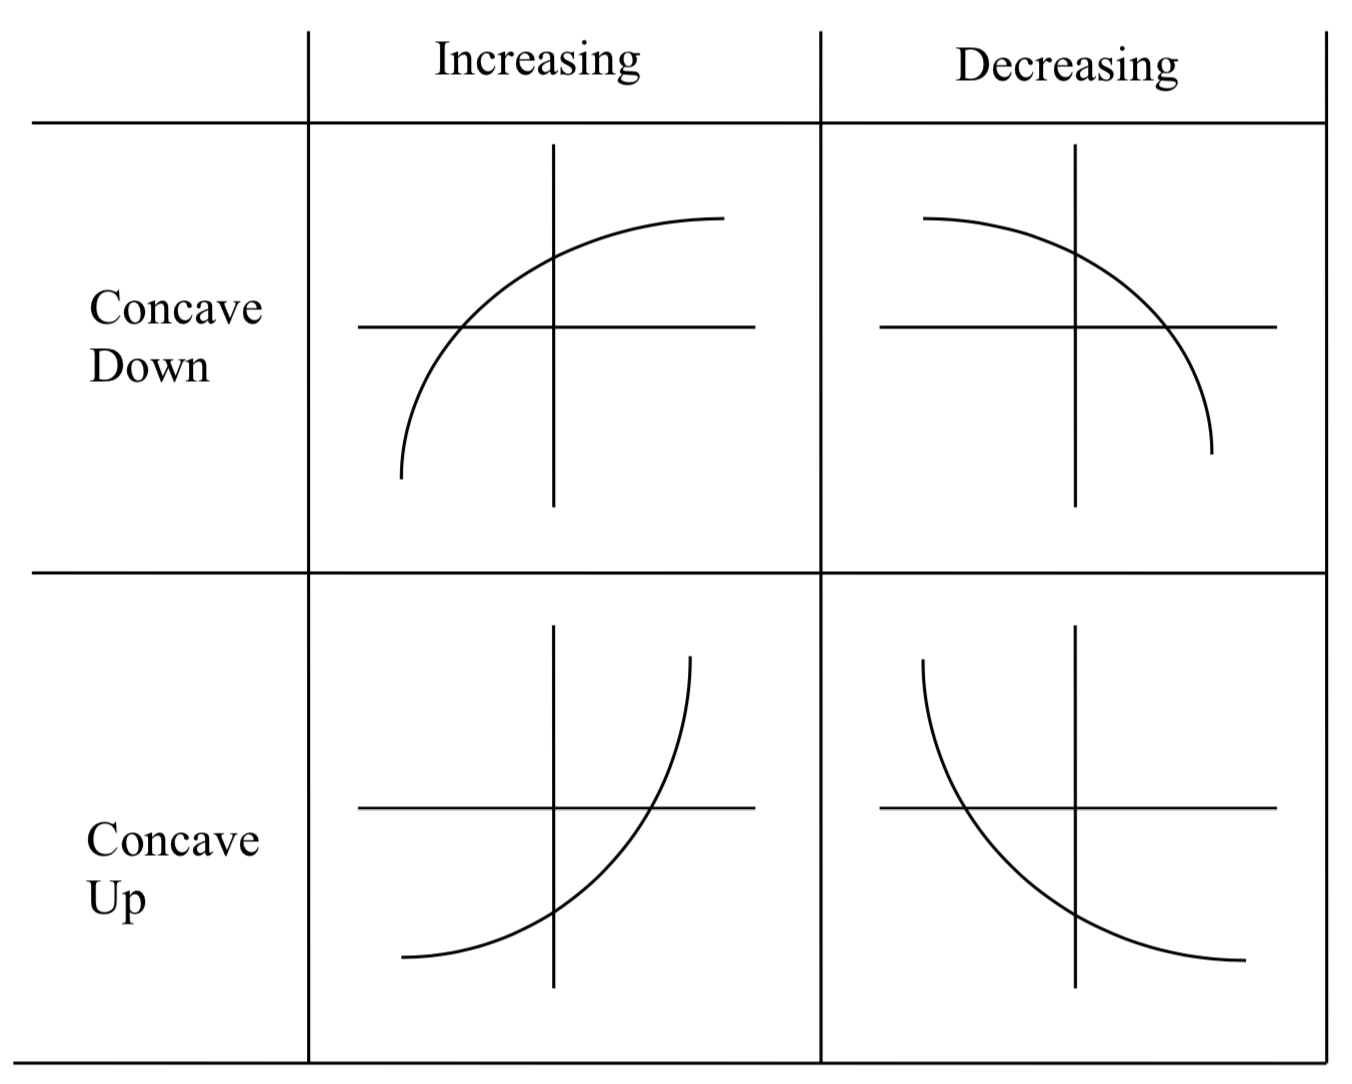 Four graphs. The graph labeled Increasing Concave Down shows a graph that looks like the left half of a frown.  The graph labeled decreasing concave down looks like the right half of a frown.  The graph labeled increasing concave up looks like the right half of a smile.  The graph labeled decreasing concave up looks like the left half of a smile.